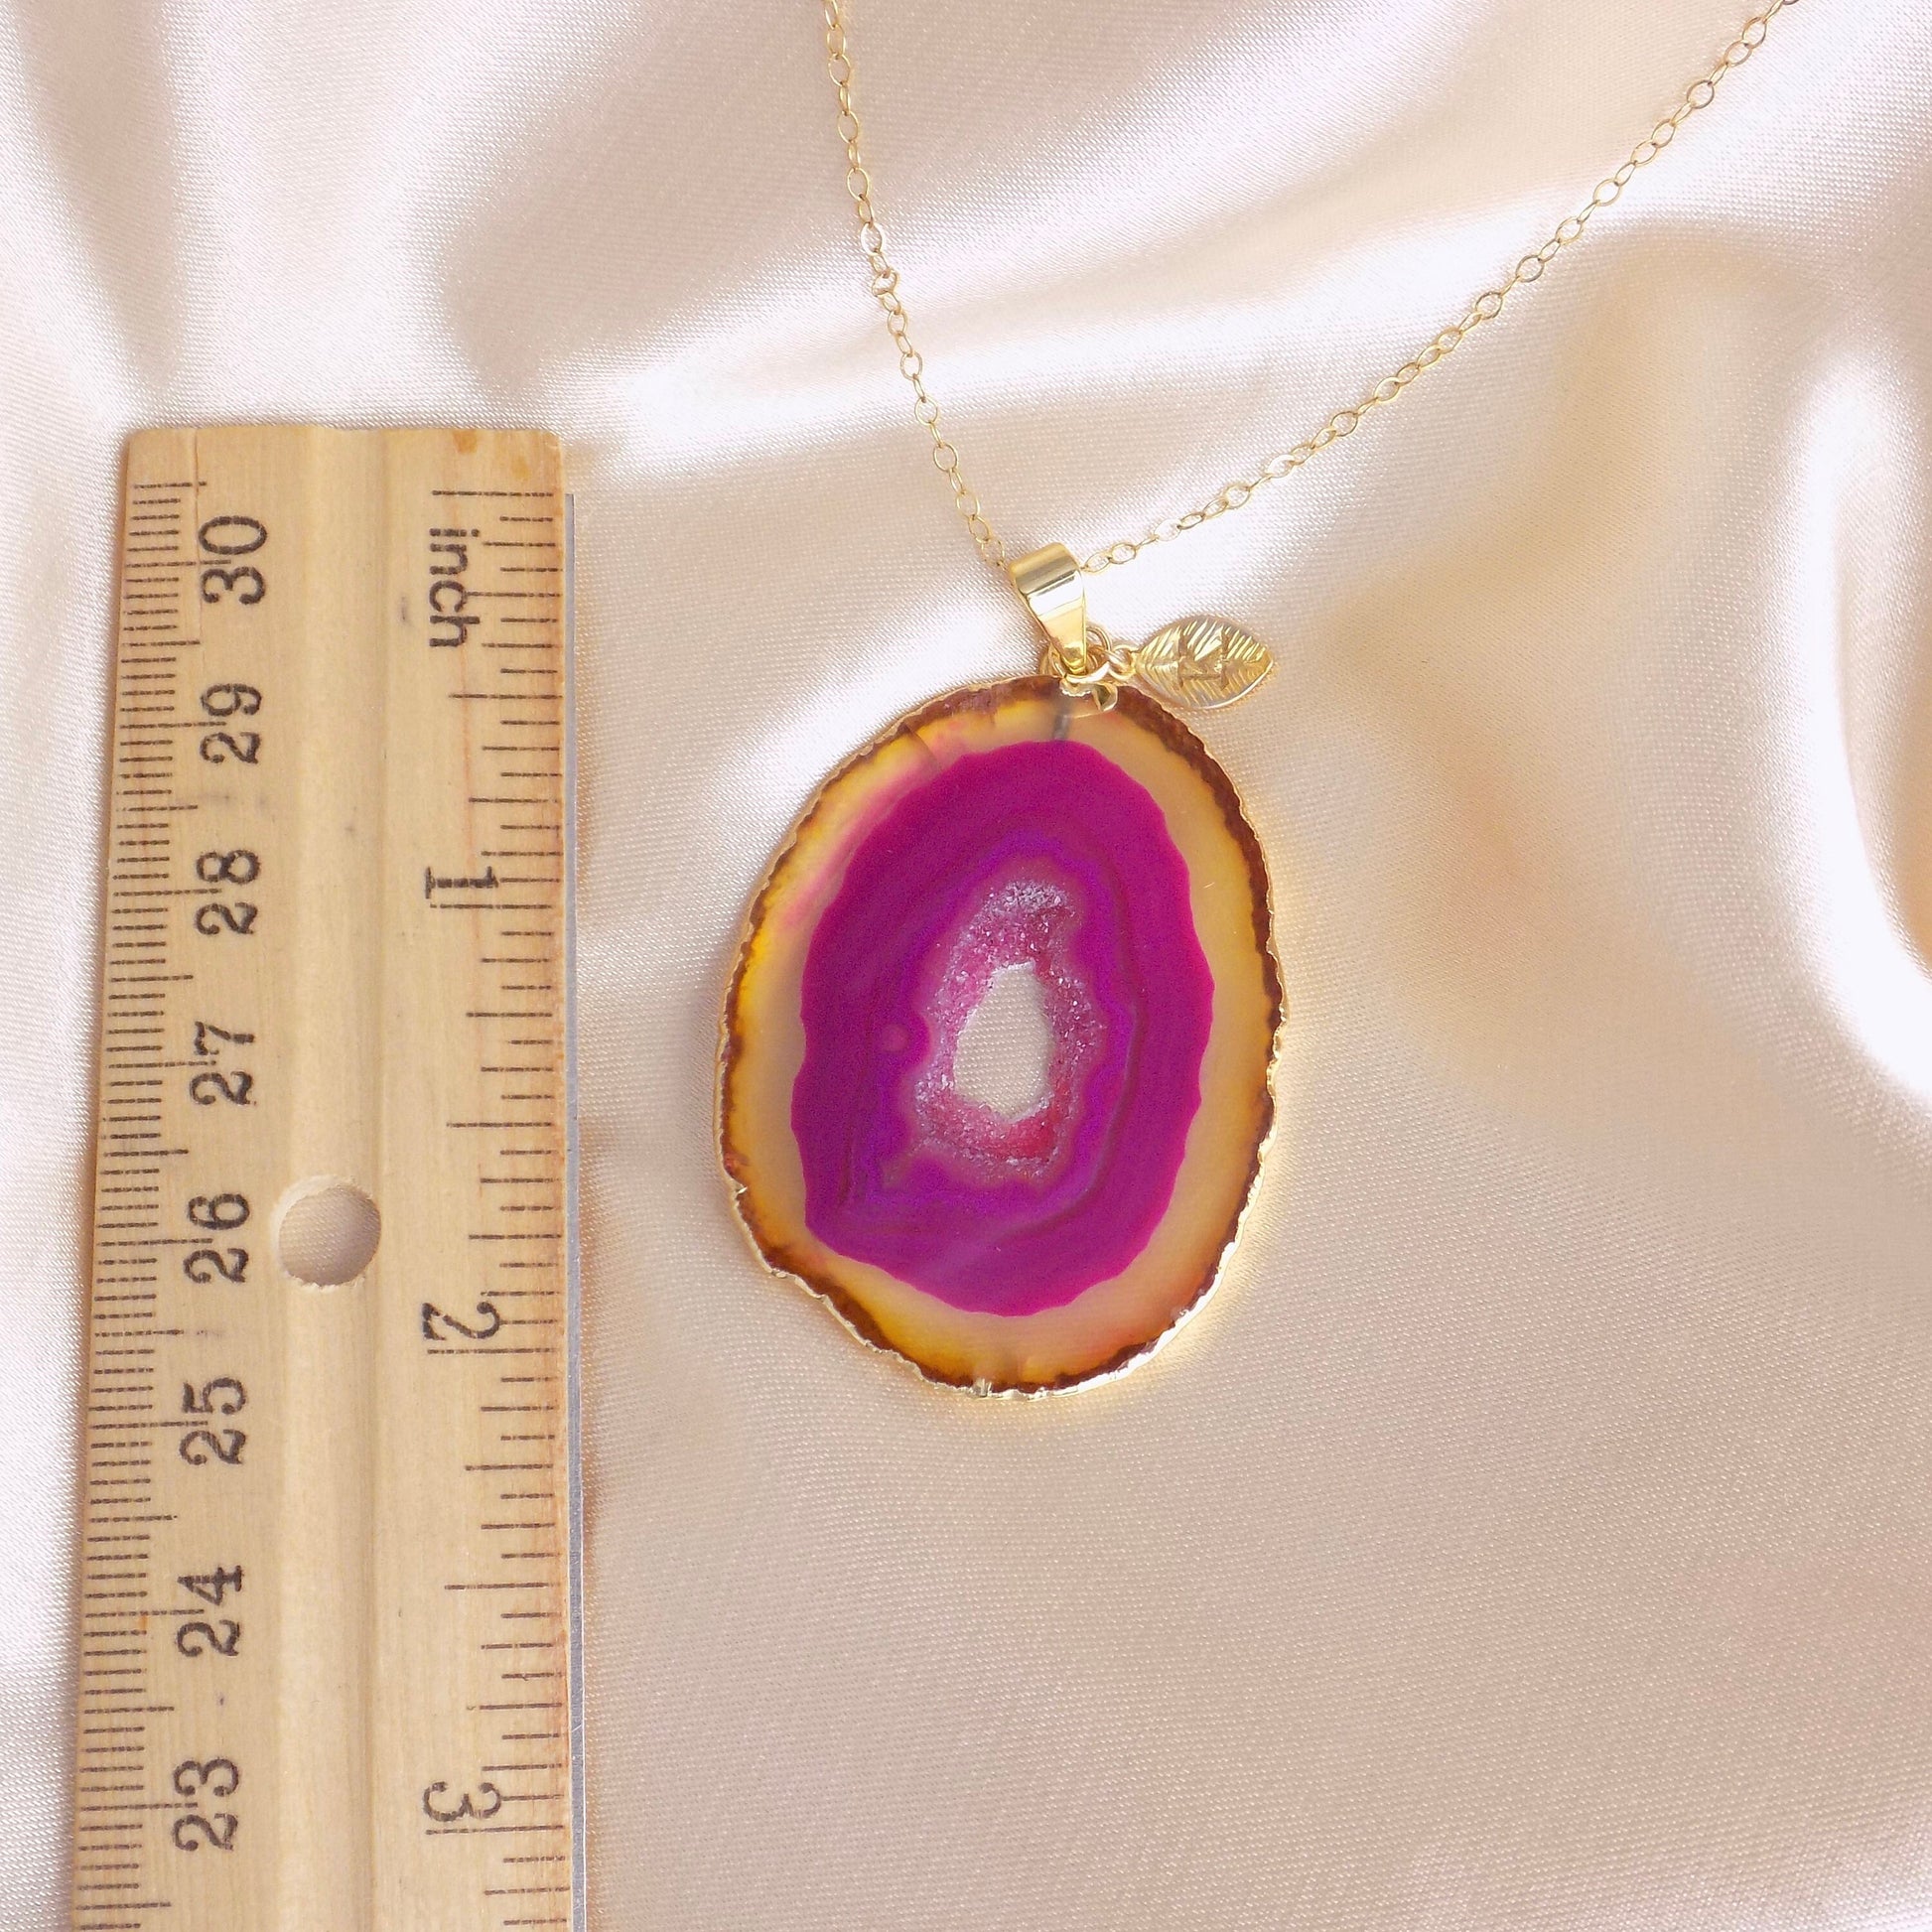 Custom Gift For Best Friend, Pink Druzy Necklace Gold Fill Chain, Personalized Geode Necklace Agate Pendant, Long Boho Slice, G14-831